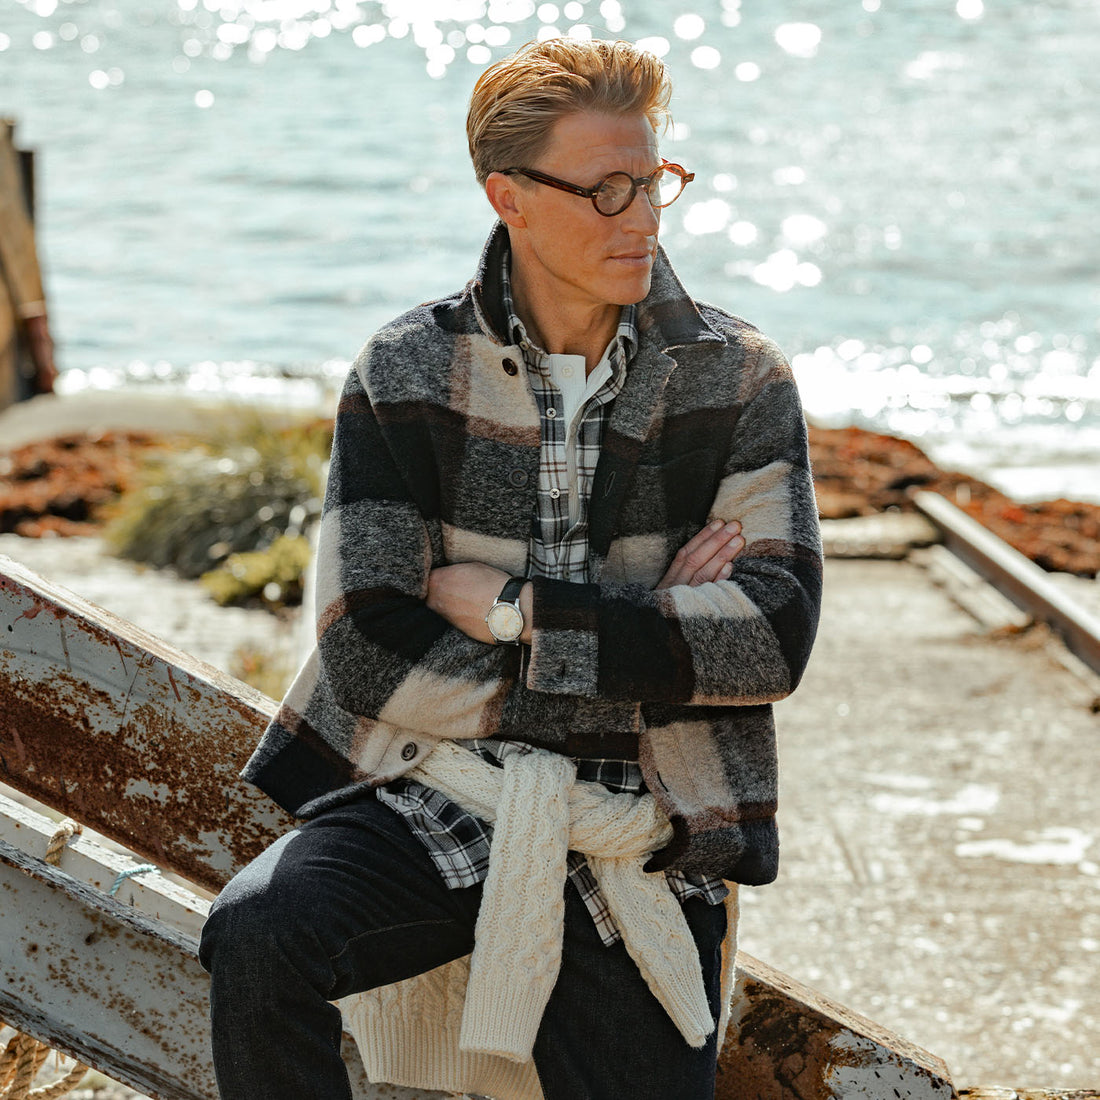 A man in glasses sits on a boat, wearing a plaid jacket and jeans, arms crossed, with sunlight reflecting off the water in the background.